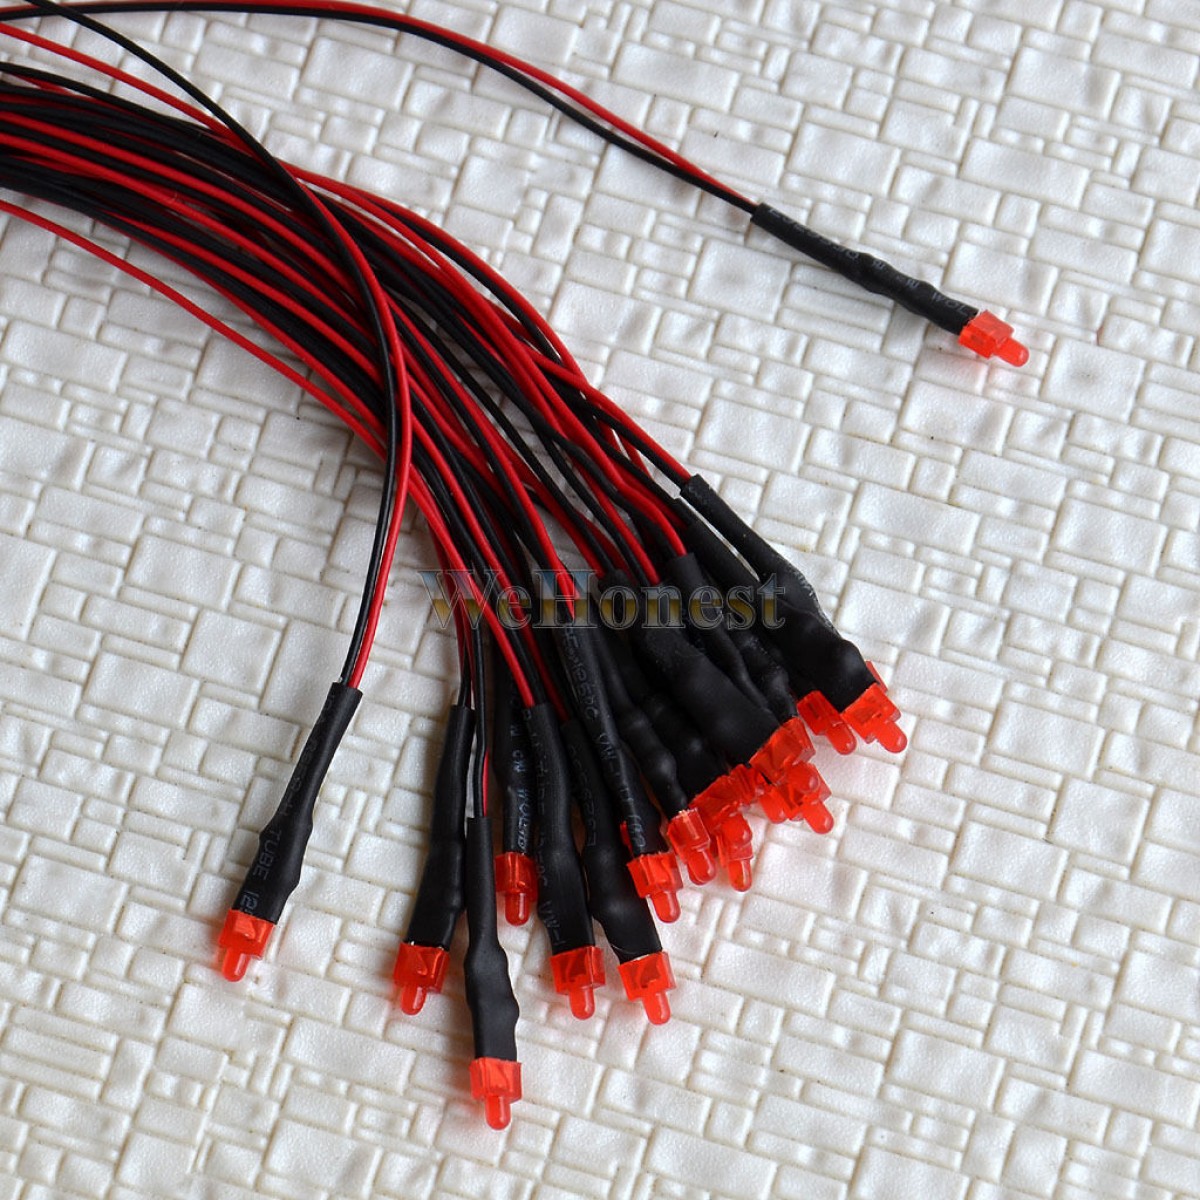 10 x prewired 2mm Red LEDs pre-wired 1k resistors for 12V to 18V DC use